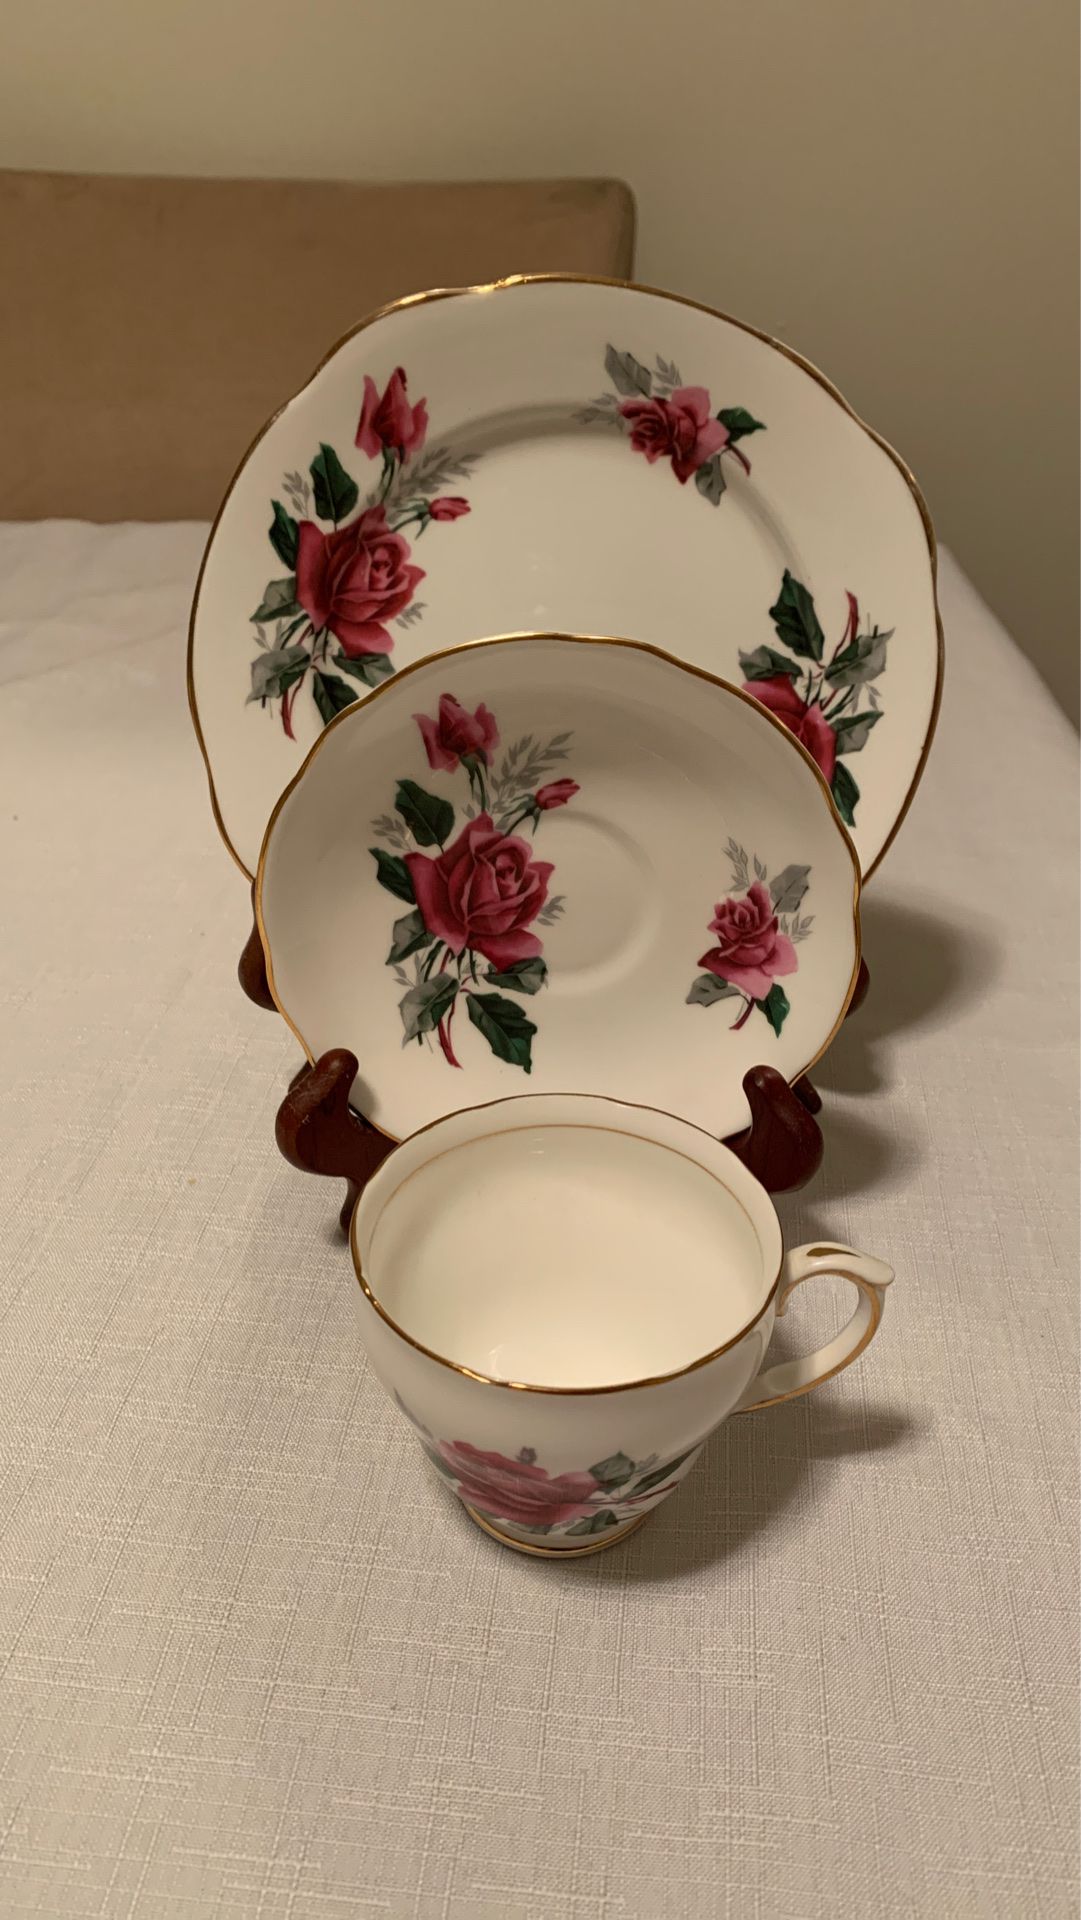 Duchess bone China cup & saucer with sandwich plate